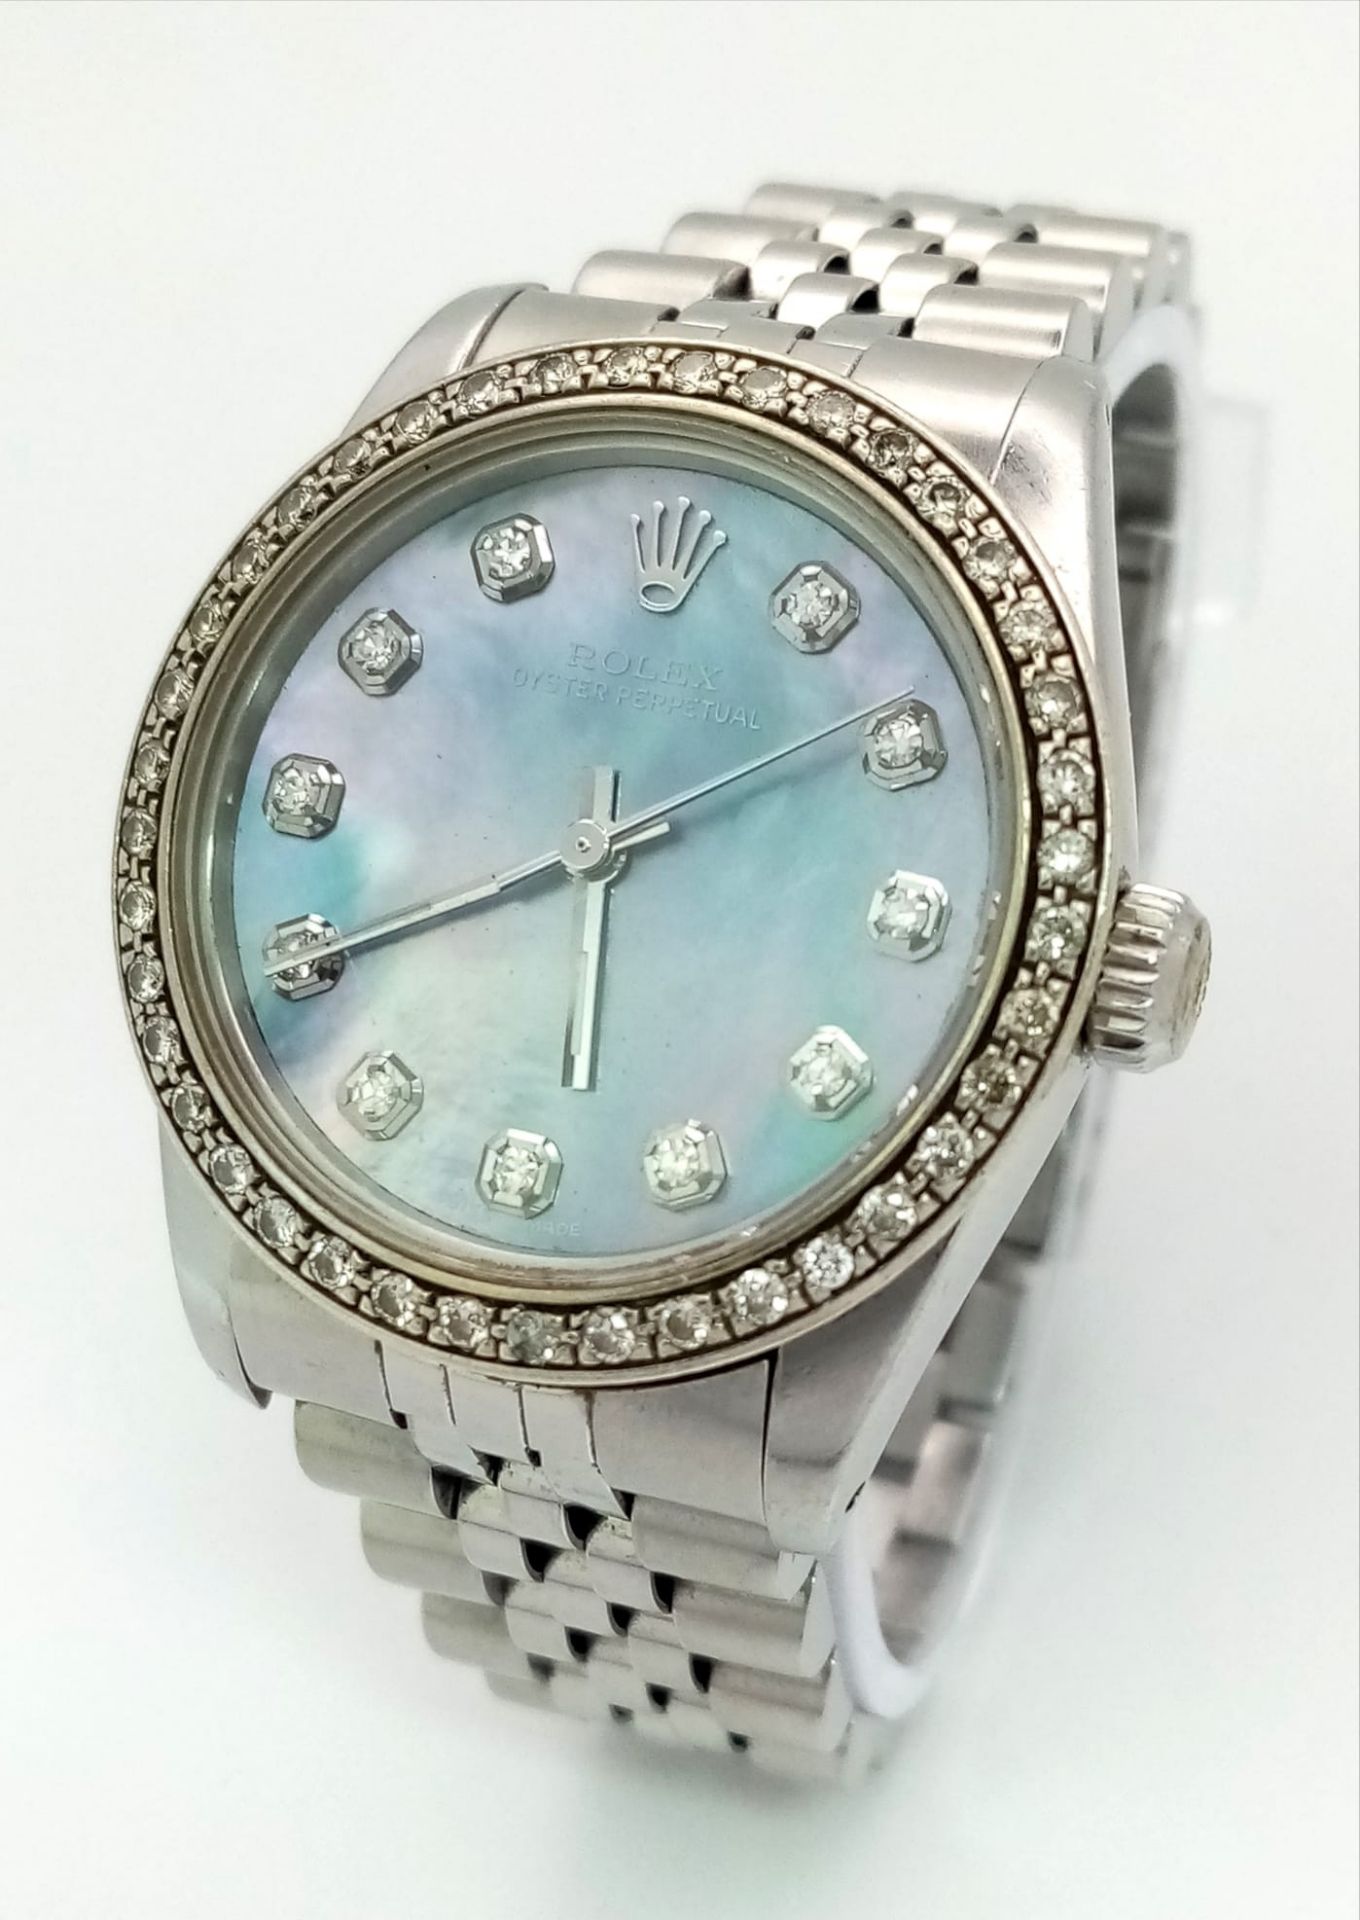 A ROLEX LADIES OYSTER PERPETUAL WRIST WATCH IN STAINLESS STEEL WITH DIAMOND BEZEL AND NUMERALS.